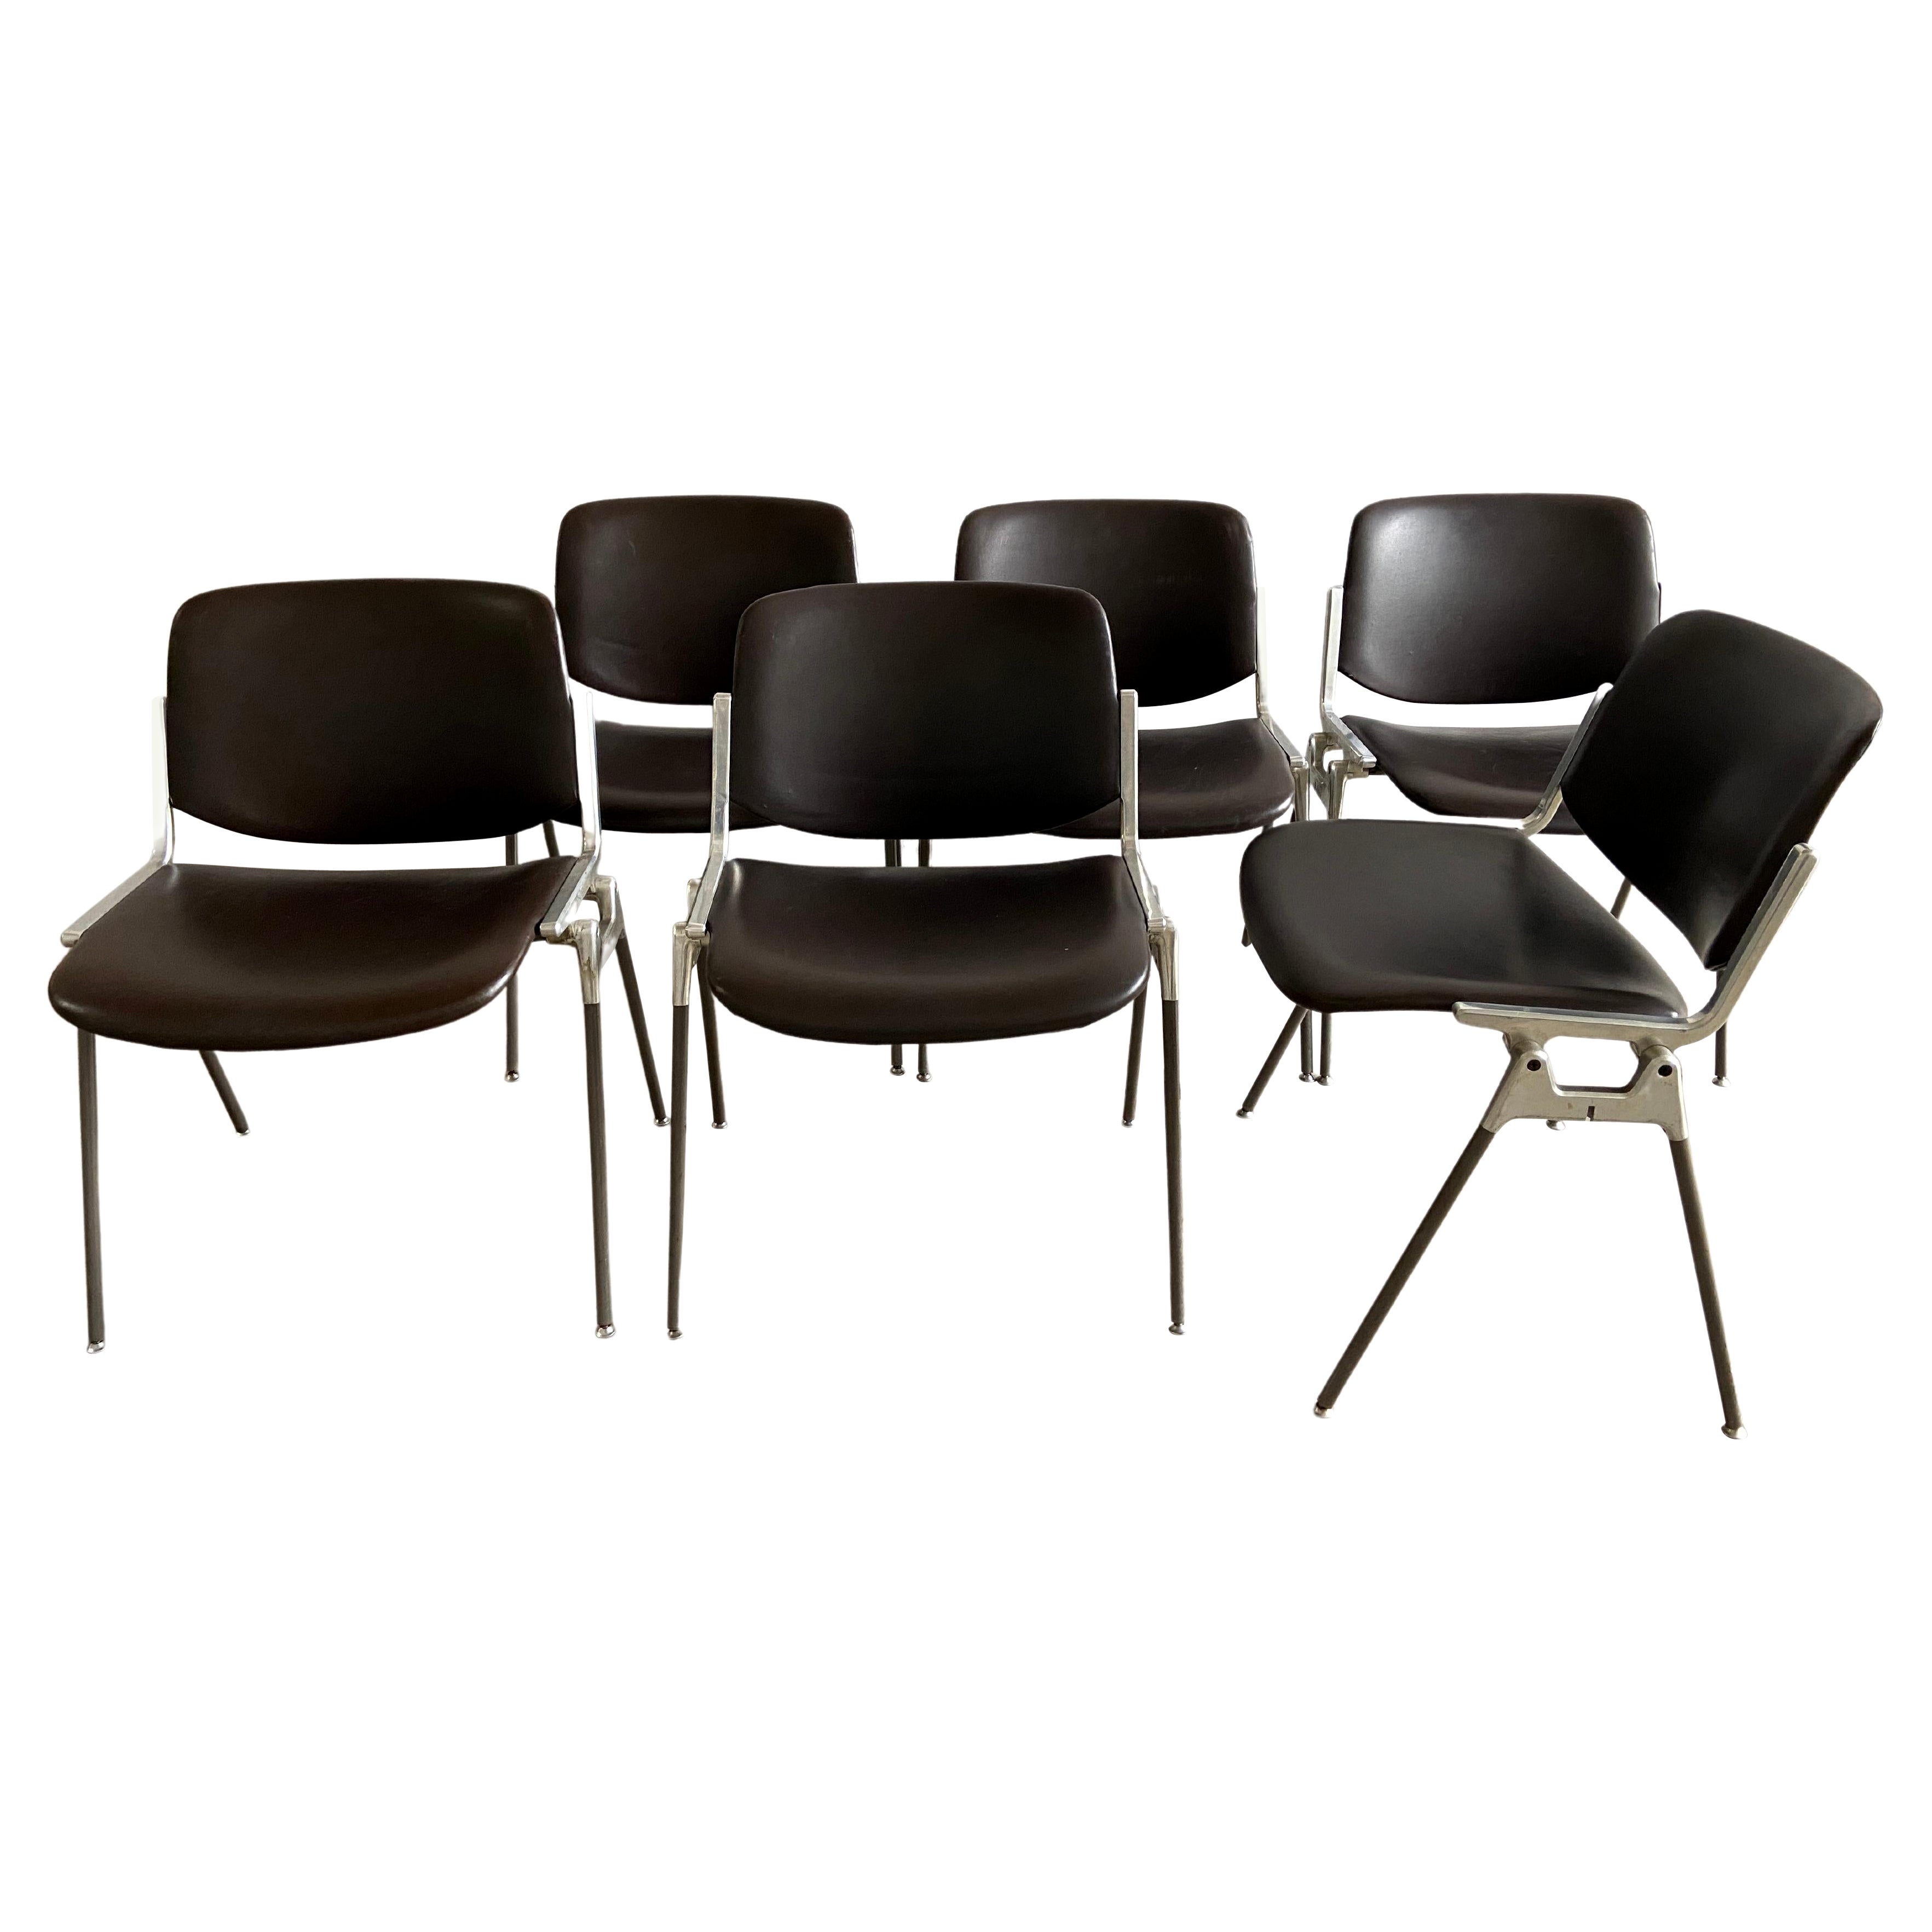 Mid-Century Modern Italian Set of 6 Stackable Chairs by G. Piretti for Castelli